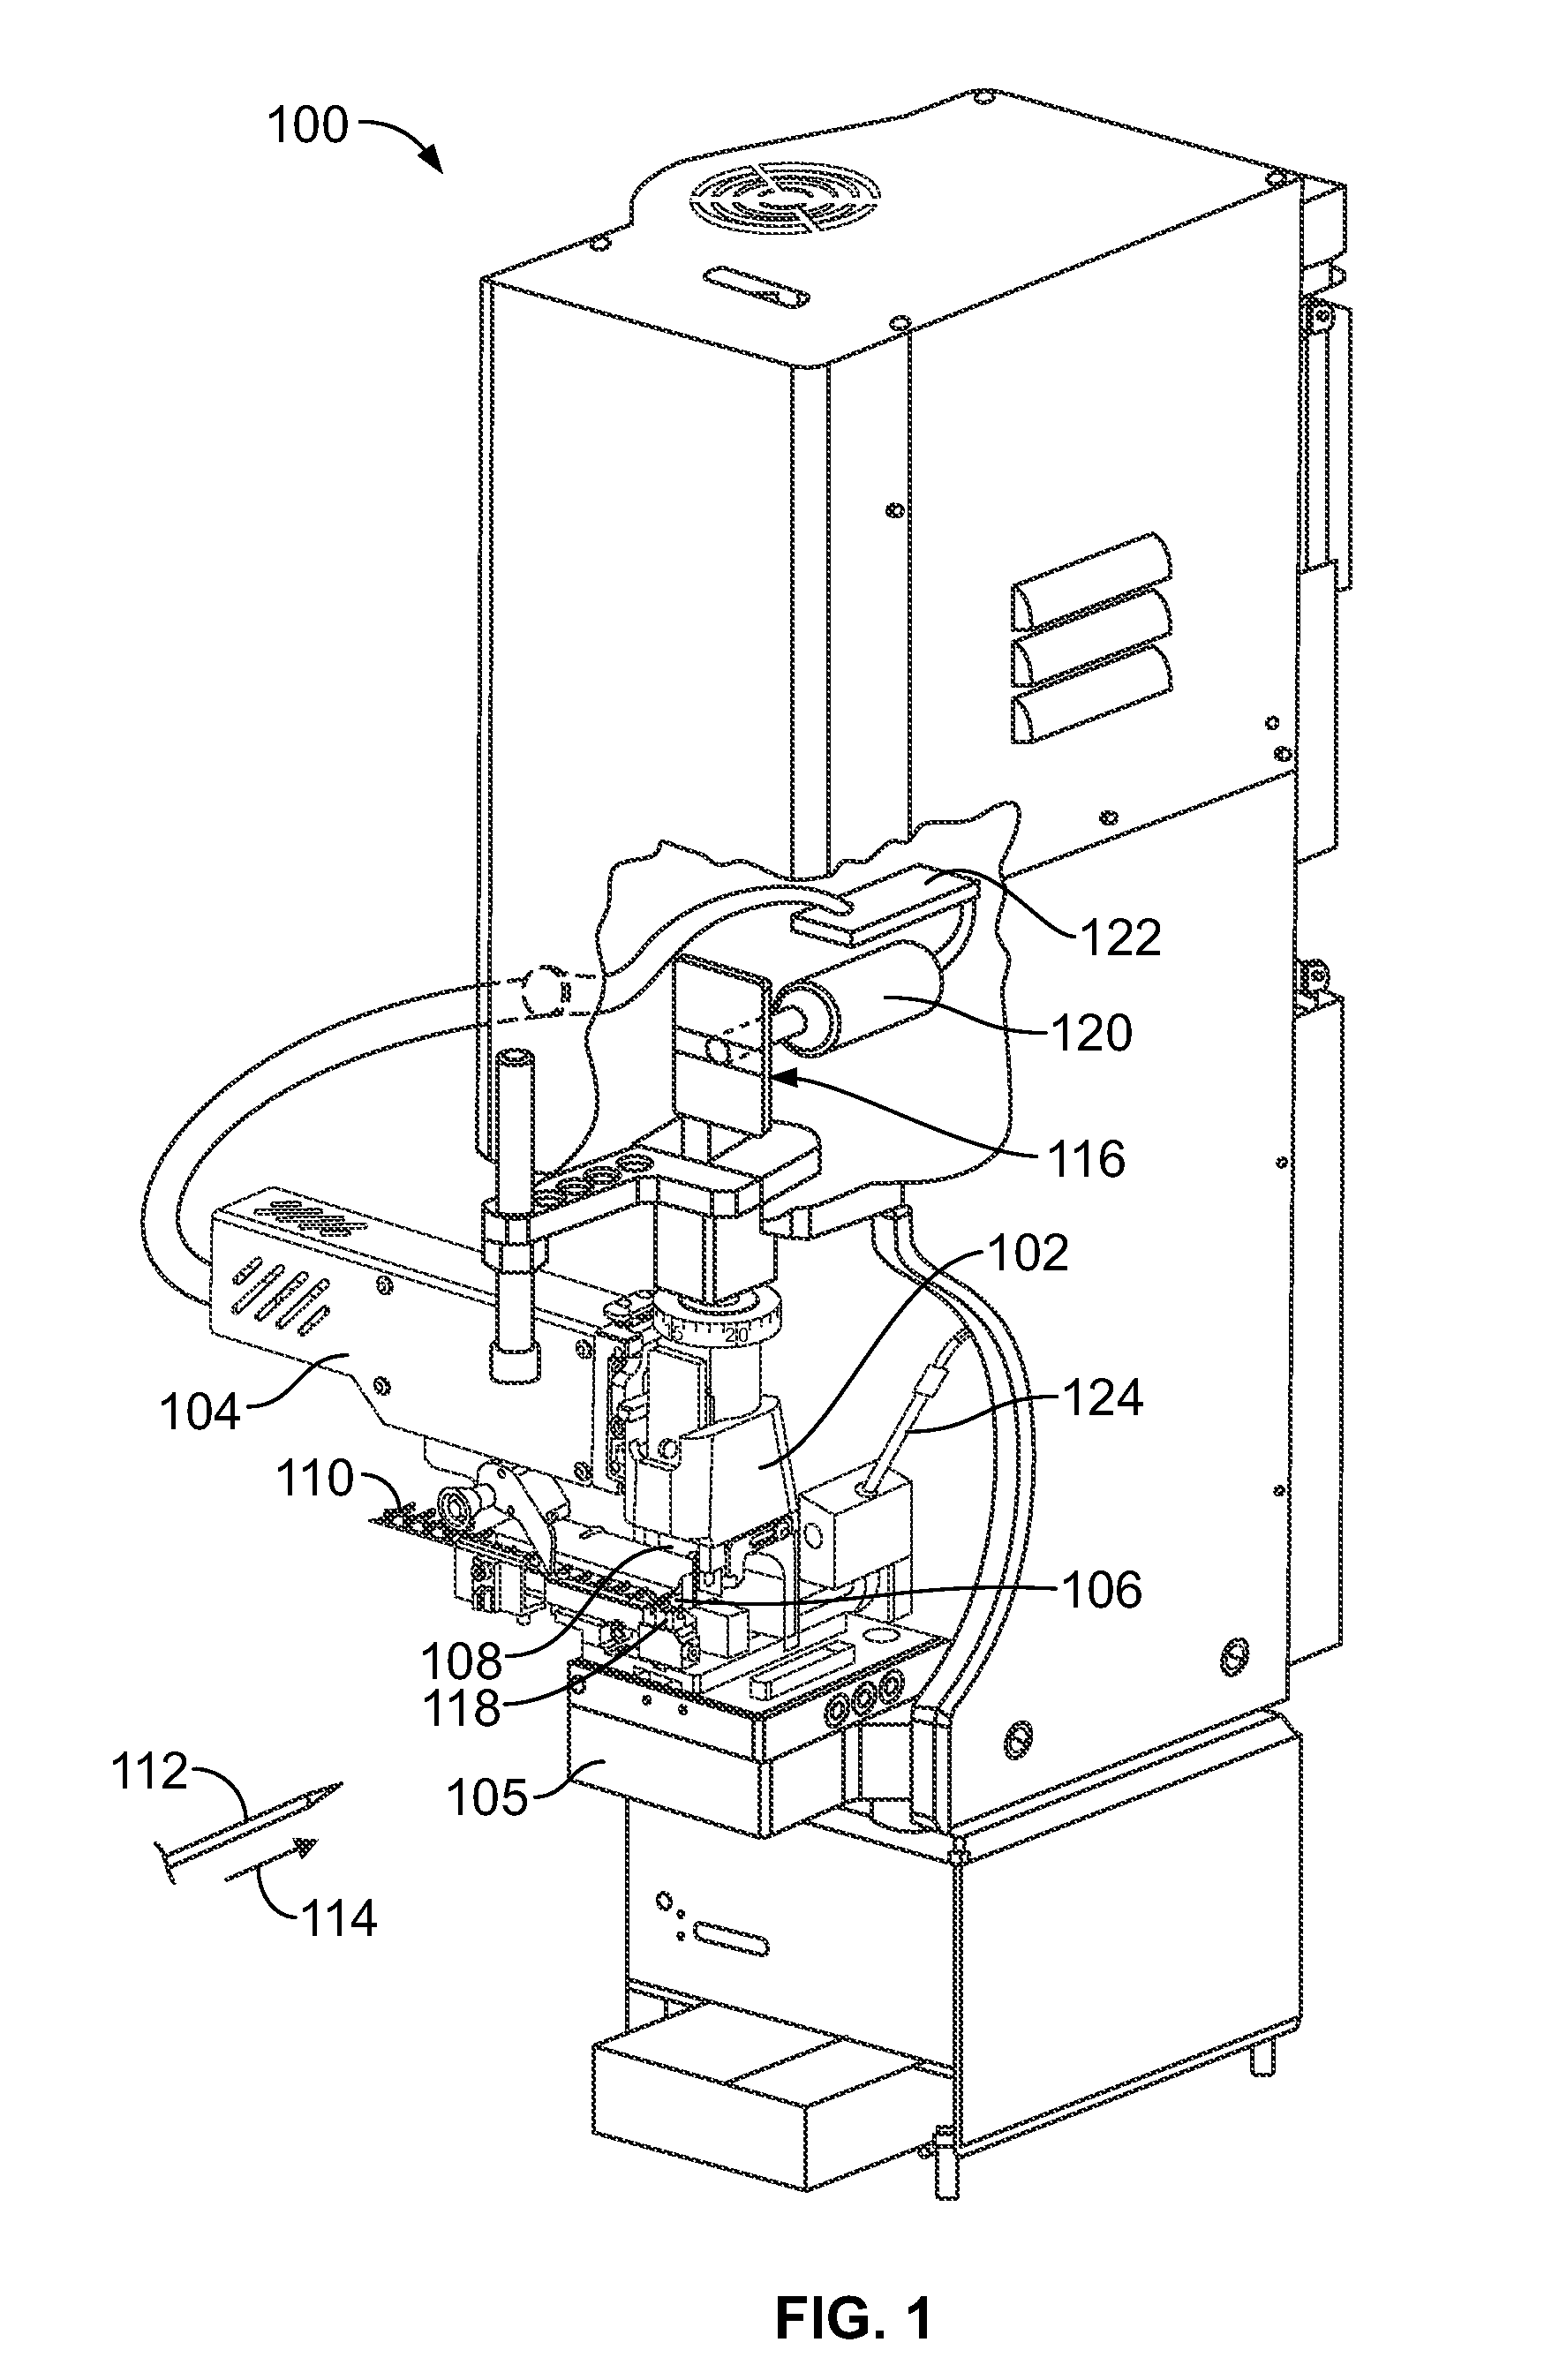 Terminal crimping machine with a terminal feed alignment aid